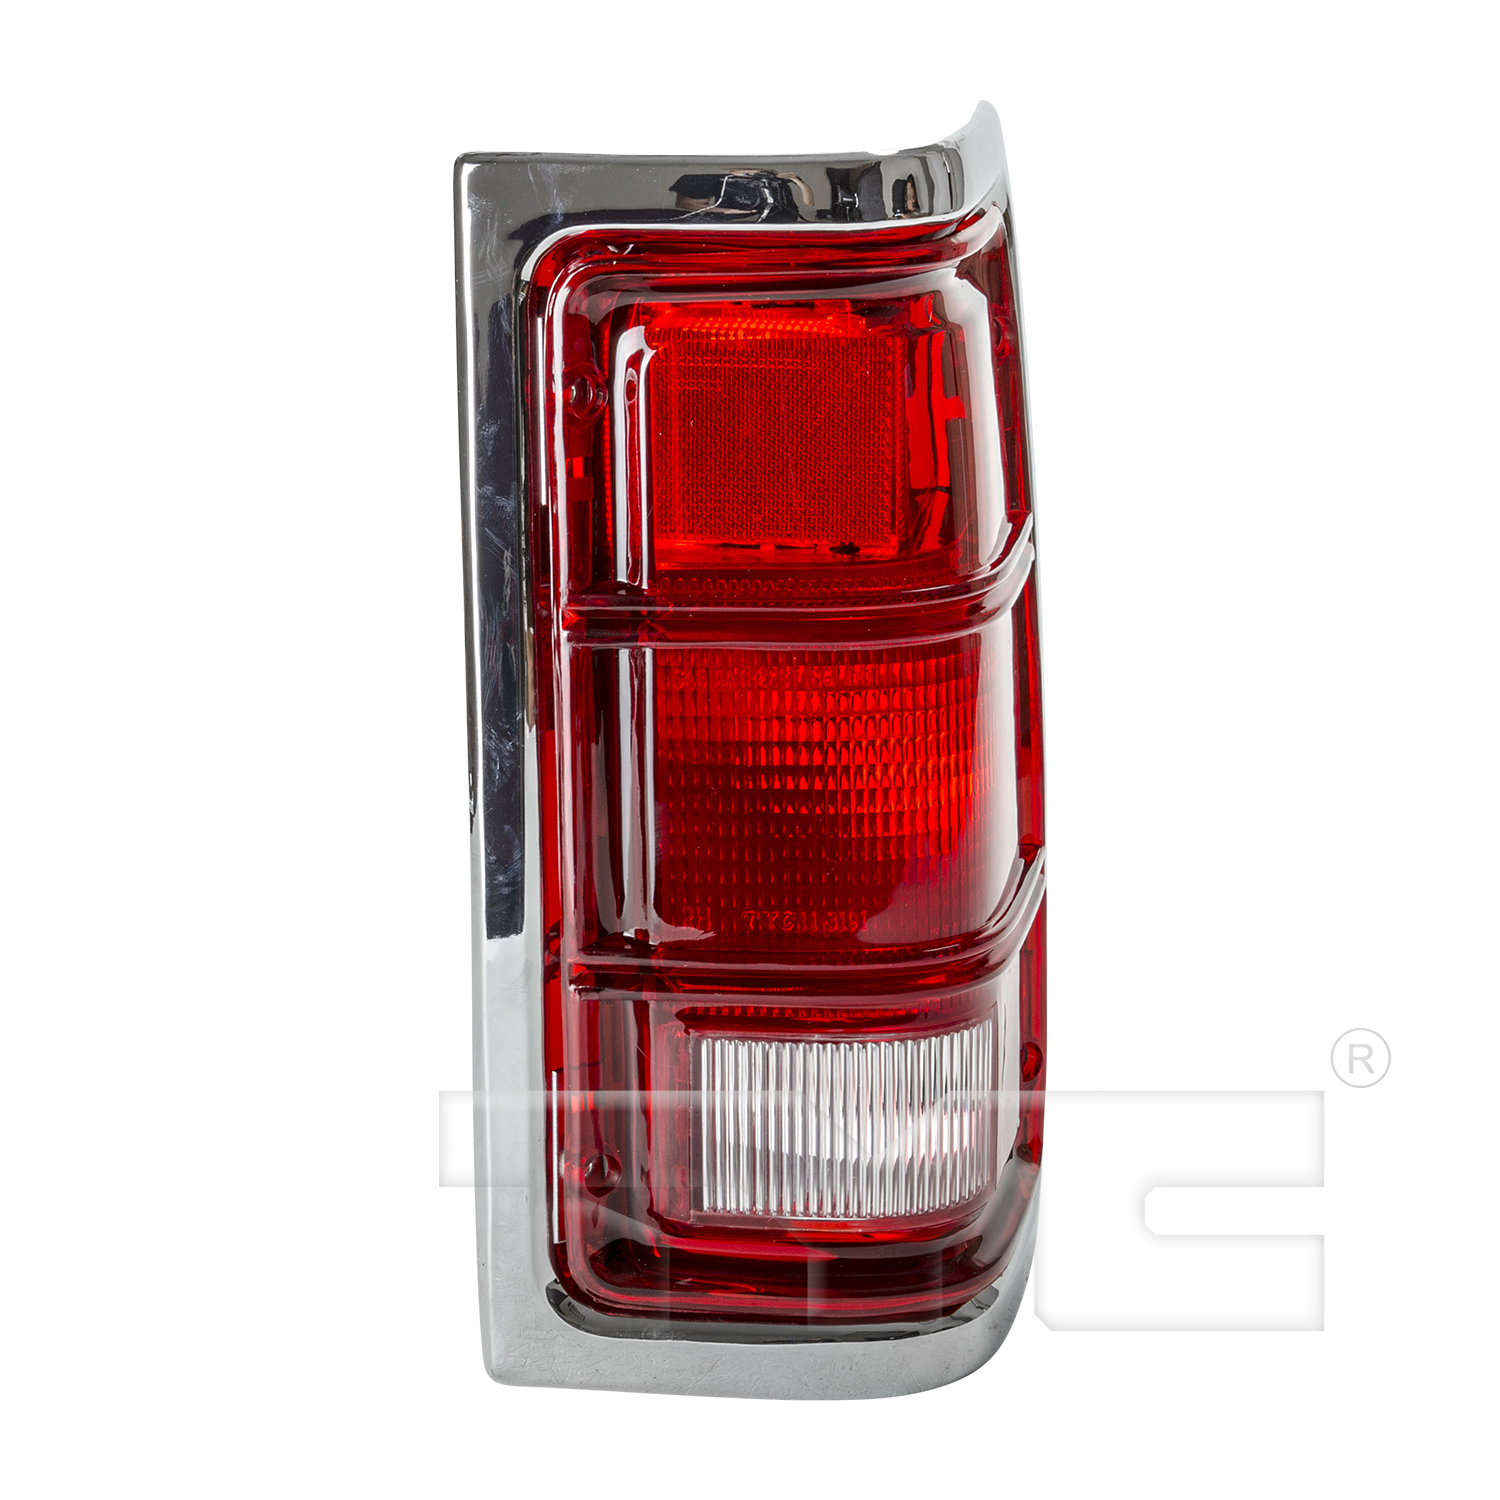 Aftermarket TAILLIGHTS for DODGE - D250, D250,87-91,RT Taillamp lens